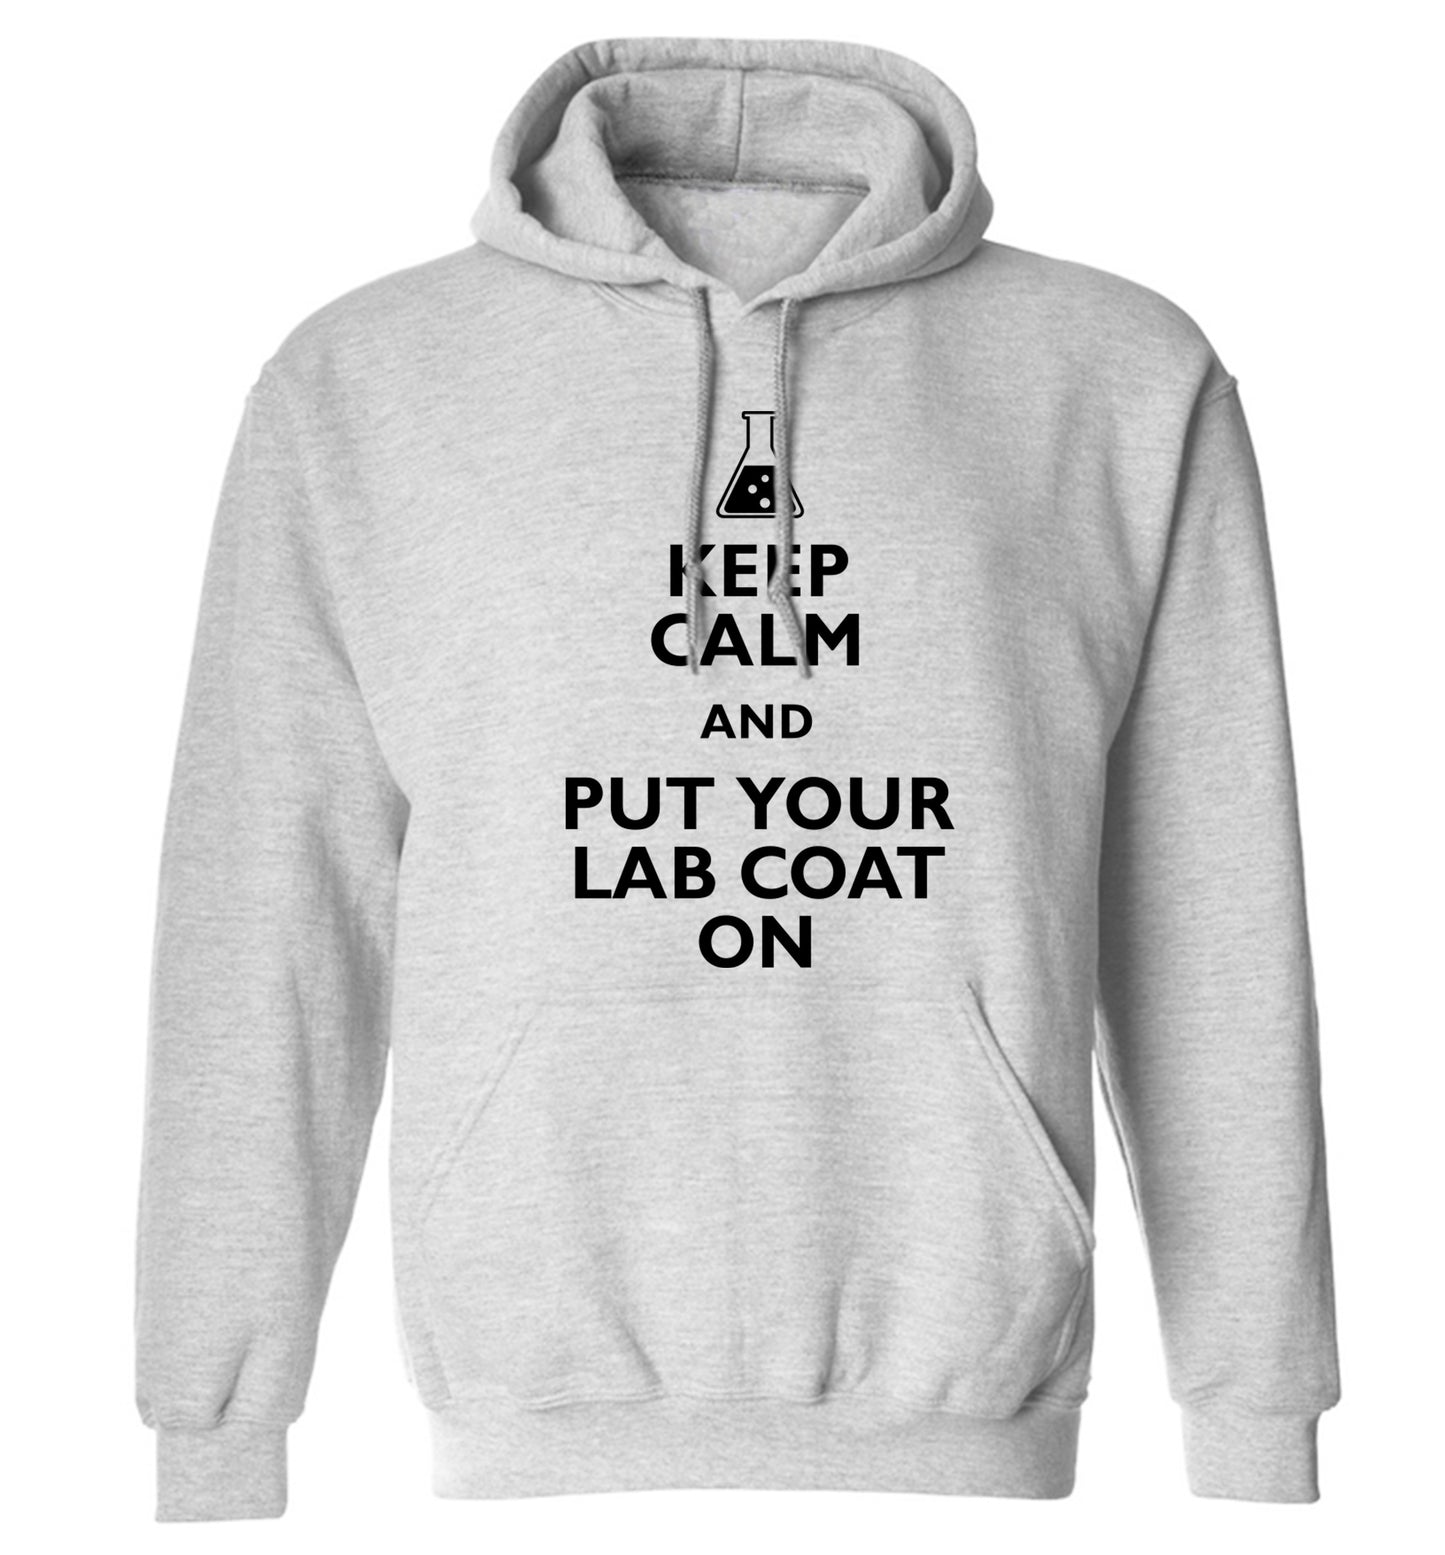 Keep calm and put your lab coat on adults unisex grey hoodie 2XL